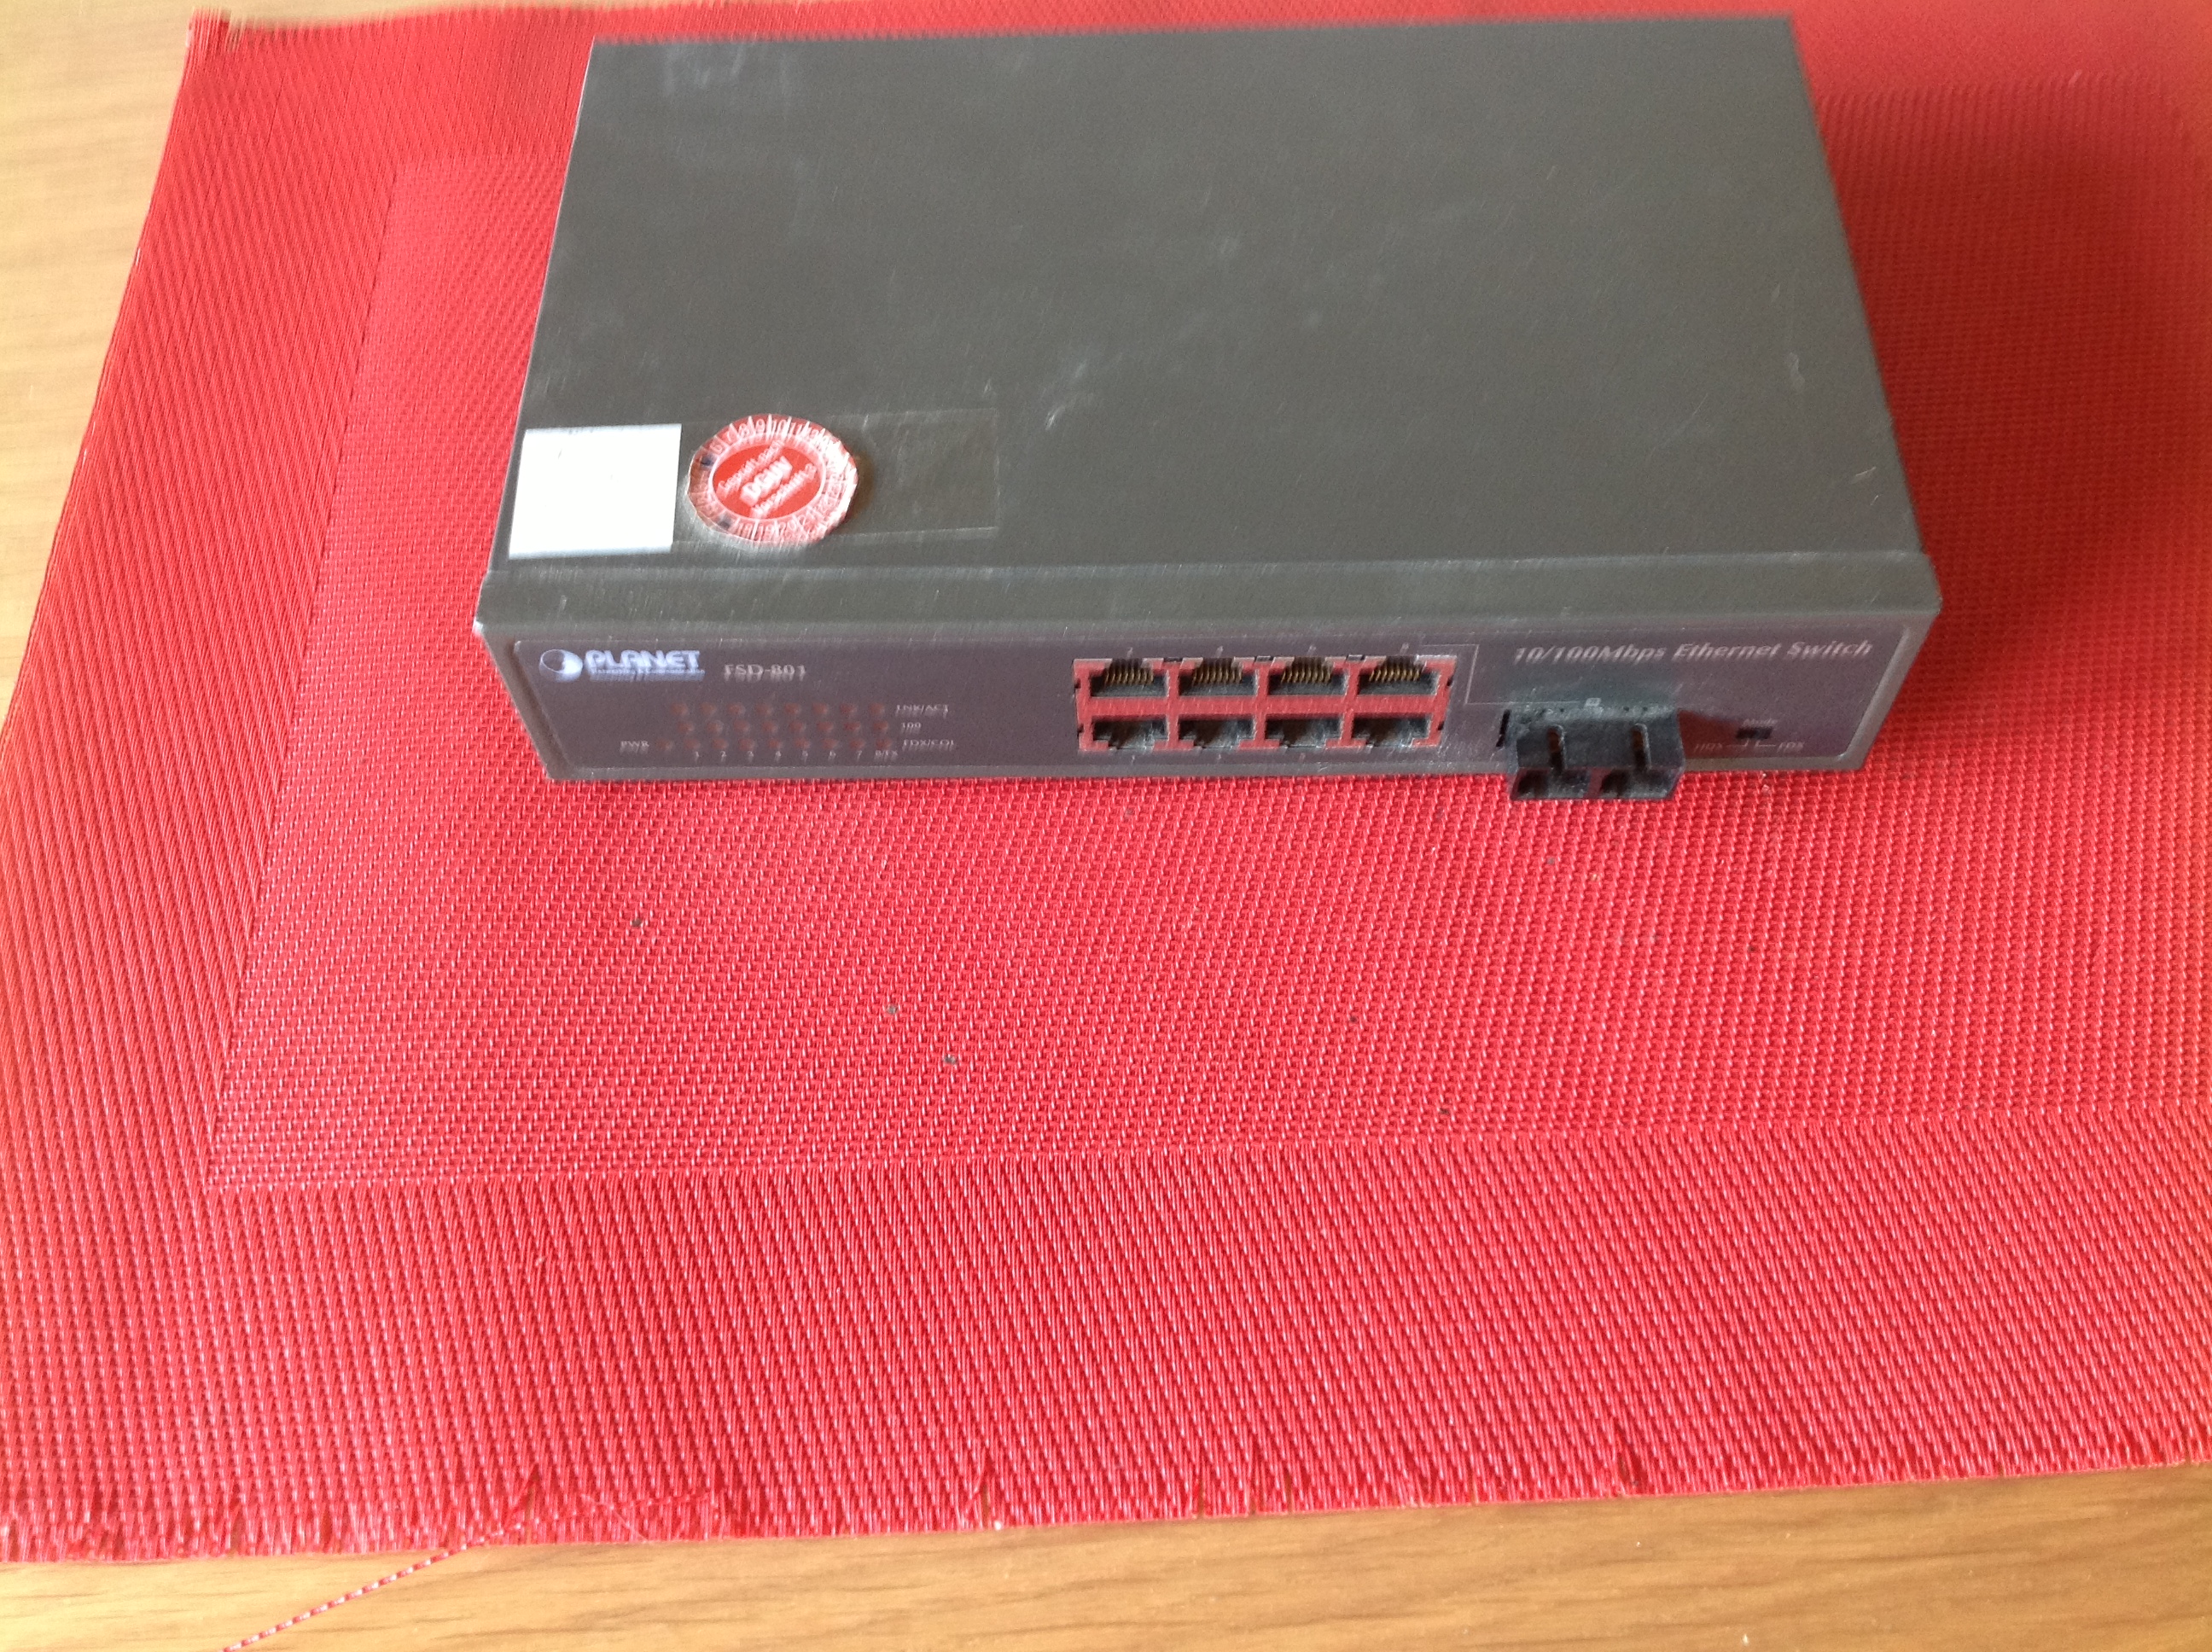 Planet FSD-801, 10/100Mbps Ethernet Switch